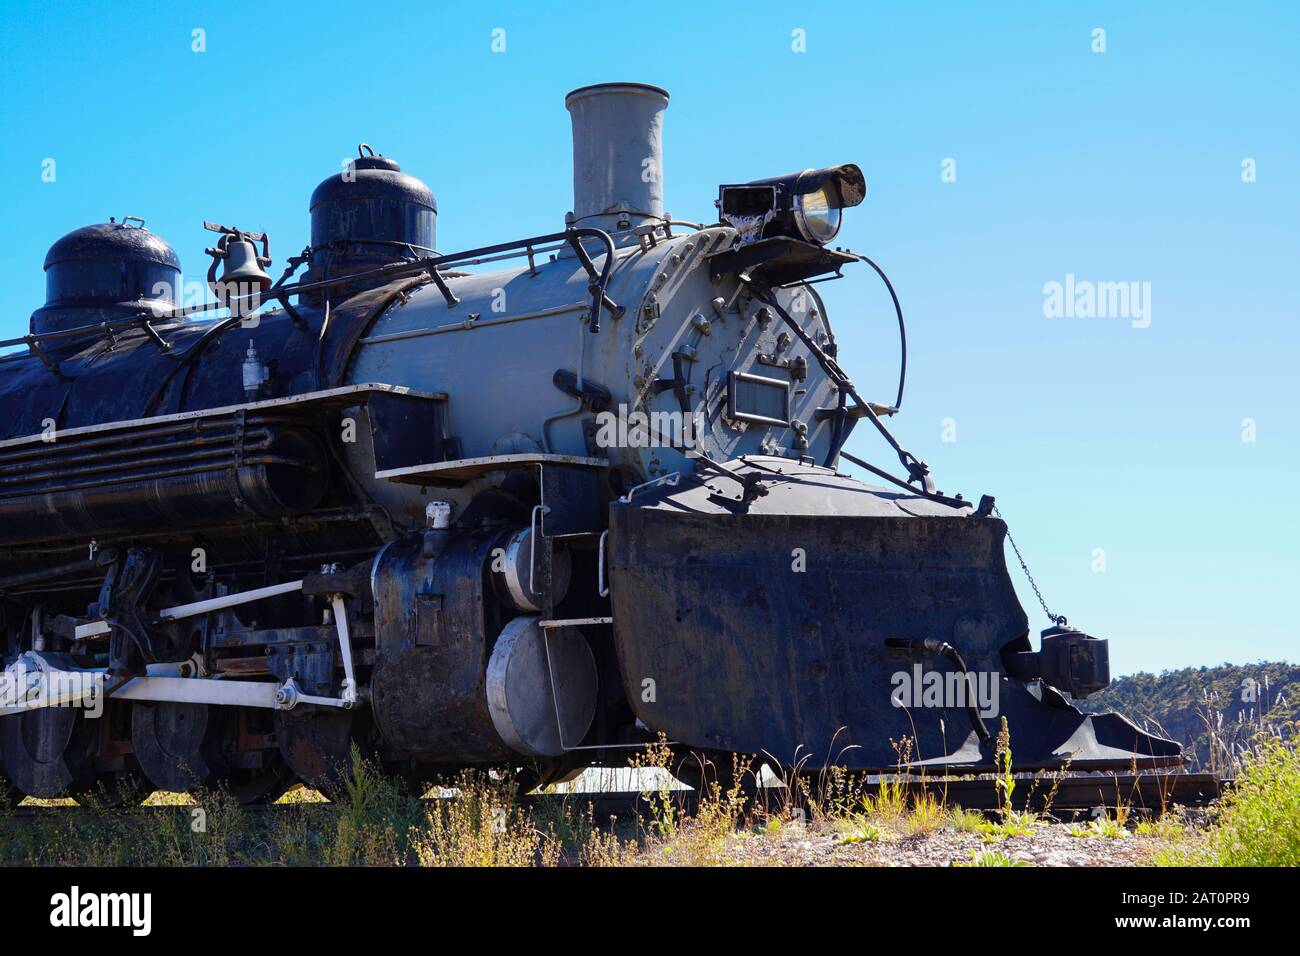 Side view of an old locomotive engine that has seen better days. Stock Photo